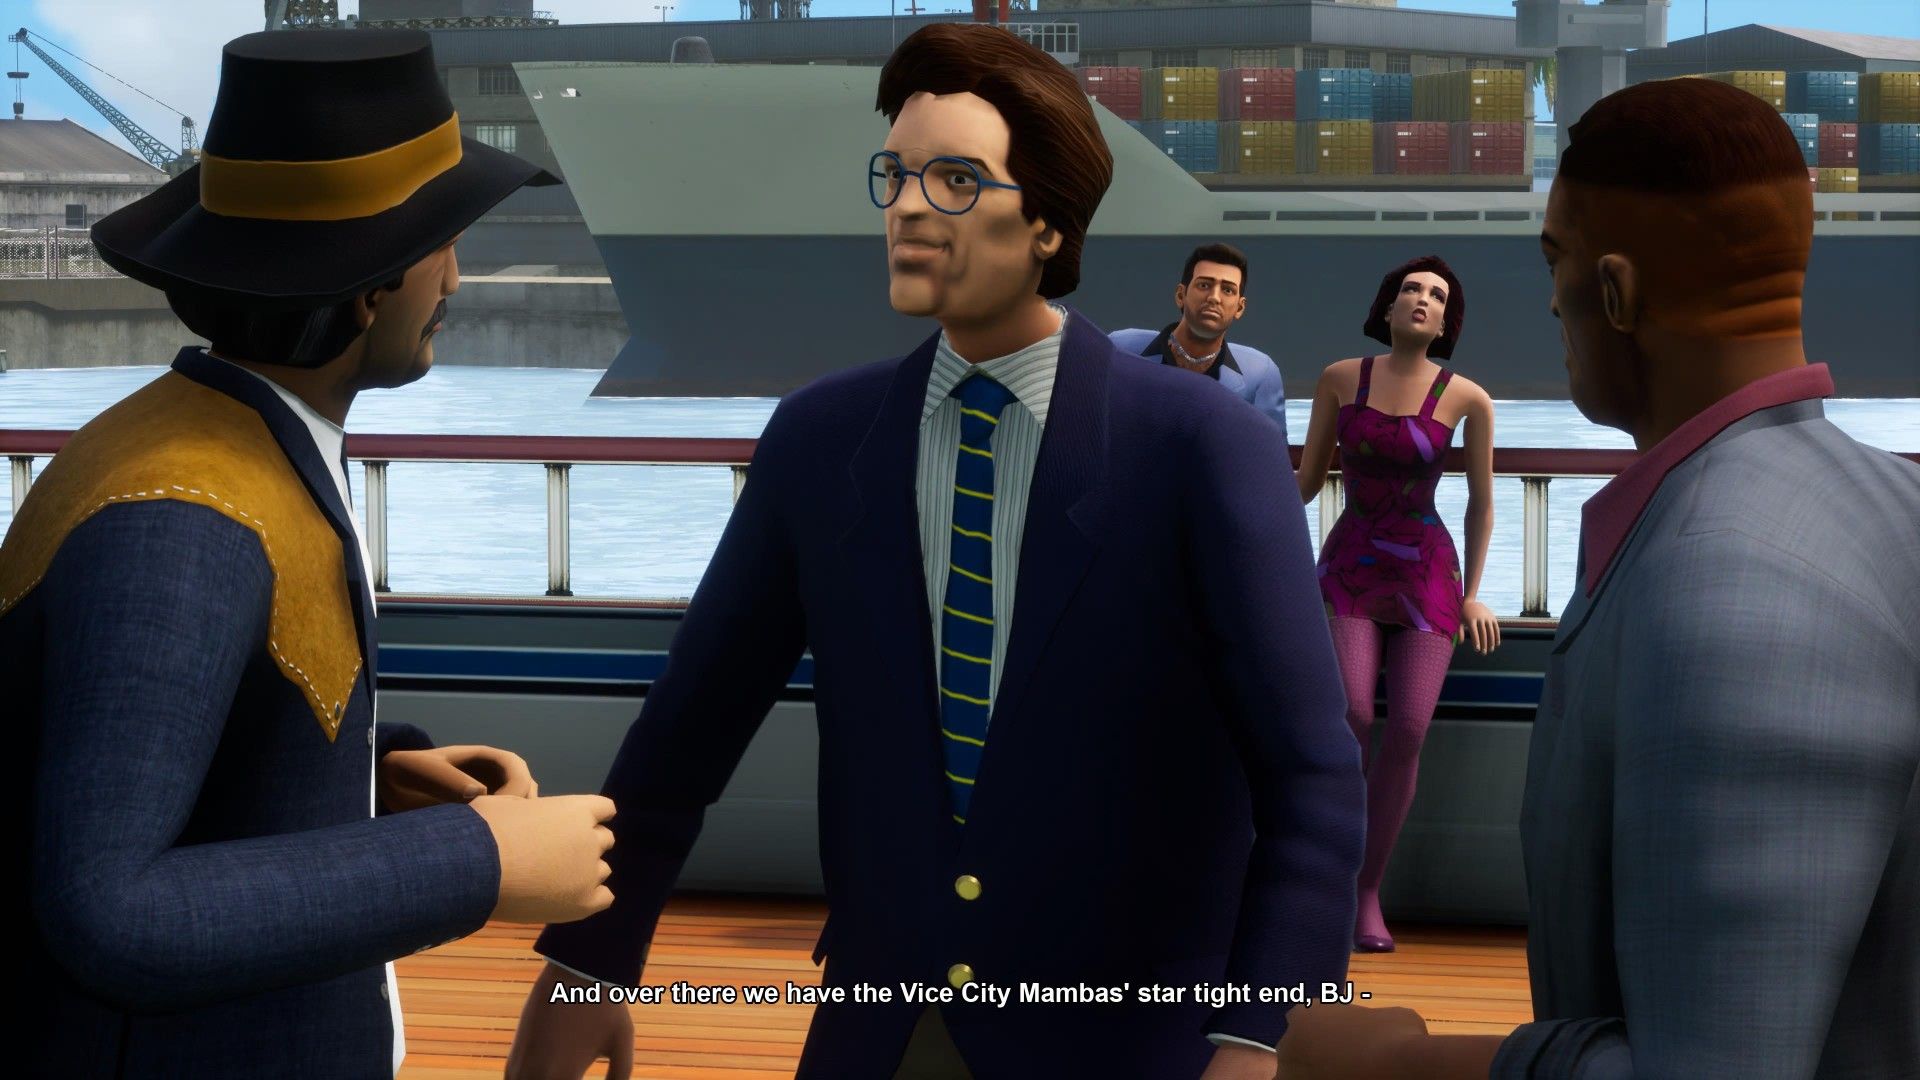 GTA Vice City's Donald Love having a conversation with Tommy and Mercedes observing in the back.